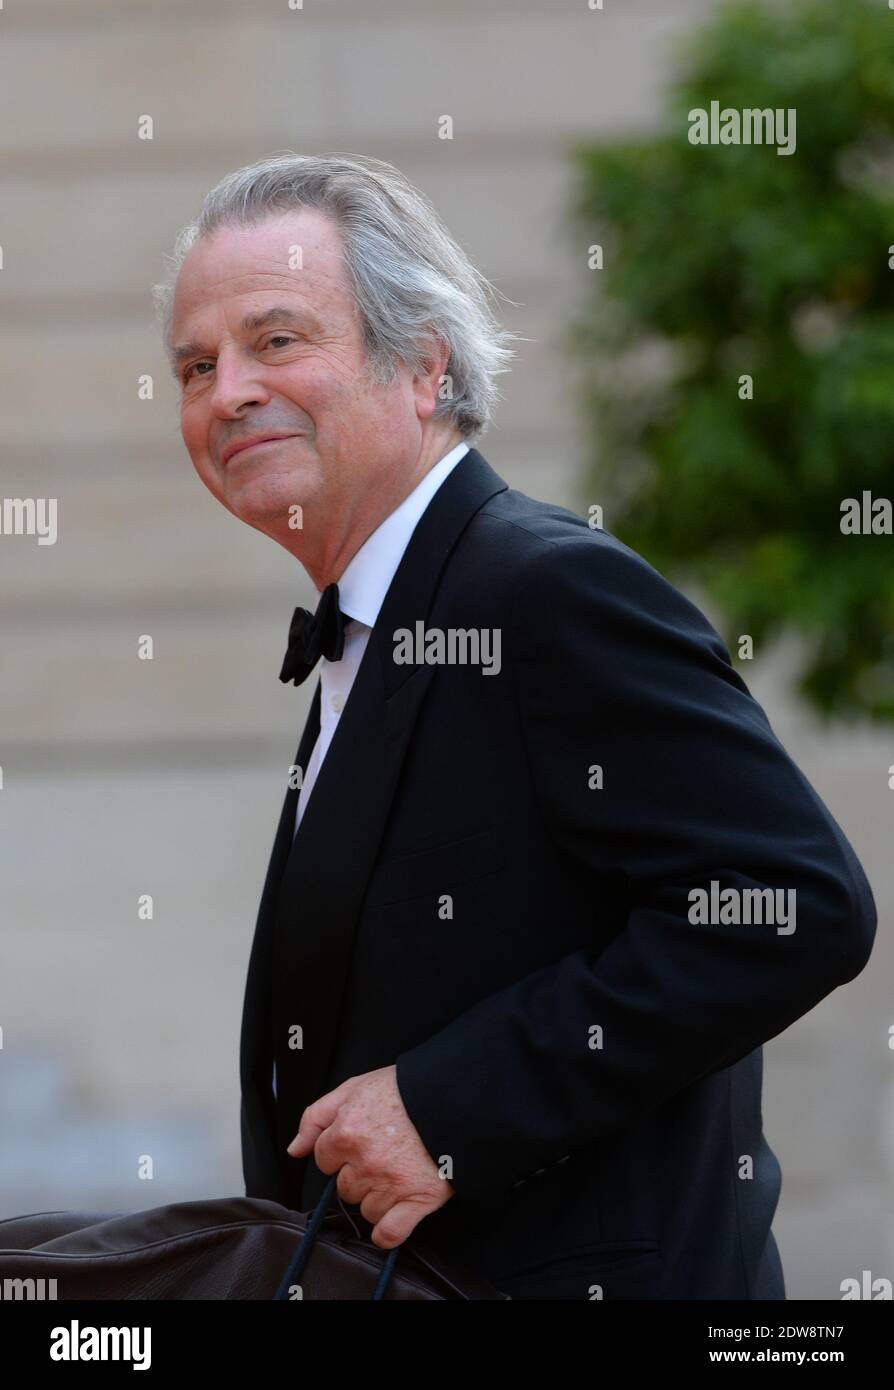 Franz-Olivier Giesbert attends the State Banquet given in honour of HM The Queen Elizabeth II by French President Francois Hollande at the Elysee Palace, as part of the official ceremonies of the 70th Anniversary of the D Day, on June 6, 2014, in Paris, France. Photo by Christian Liewig/ABACAPRESS.COM Stock Photo